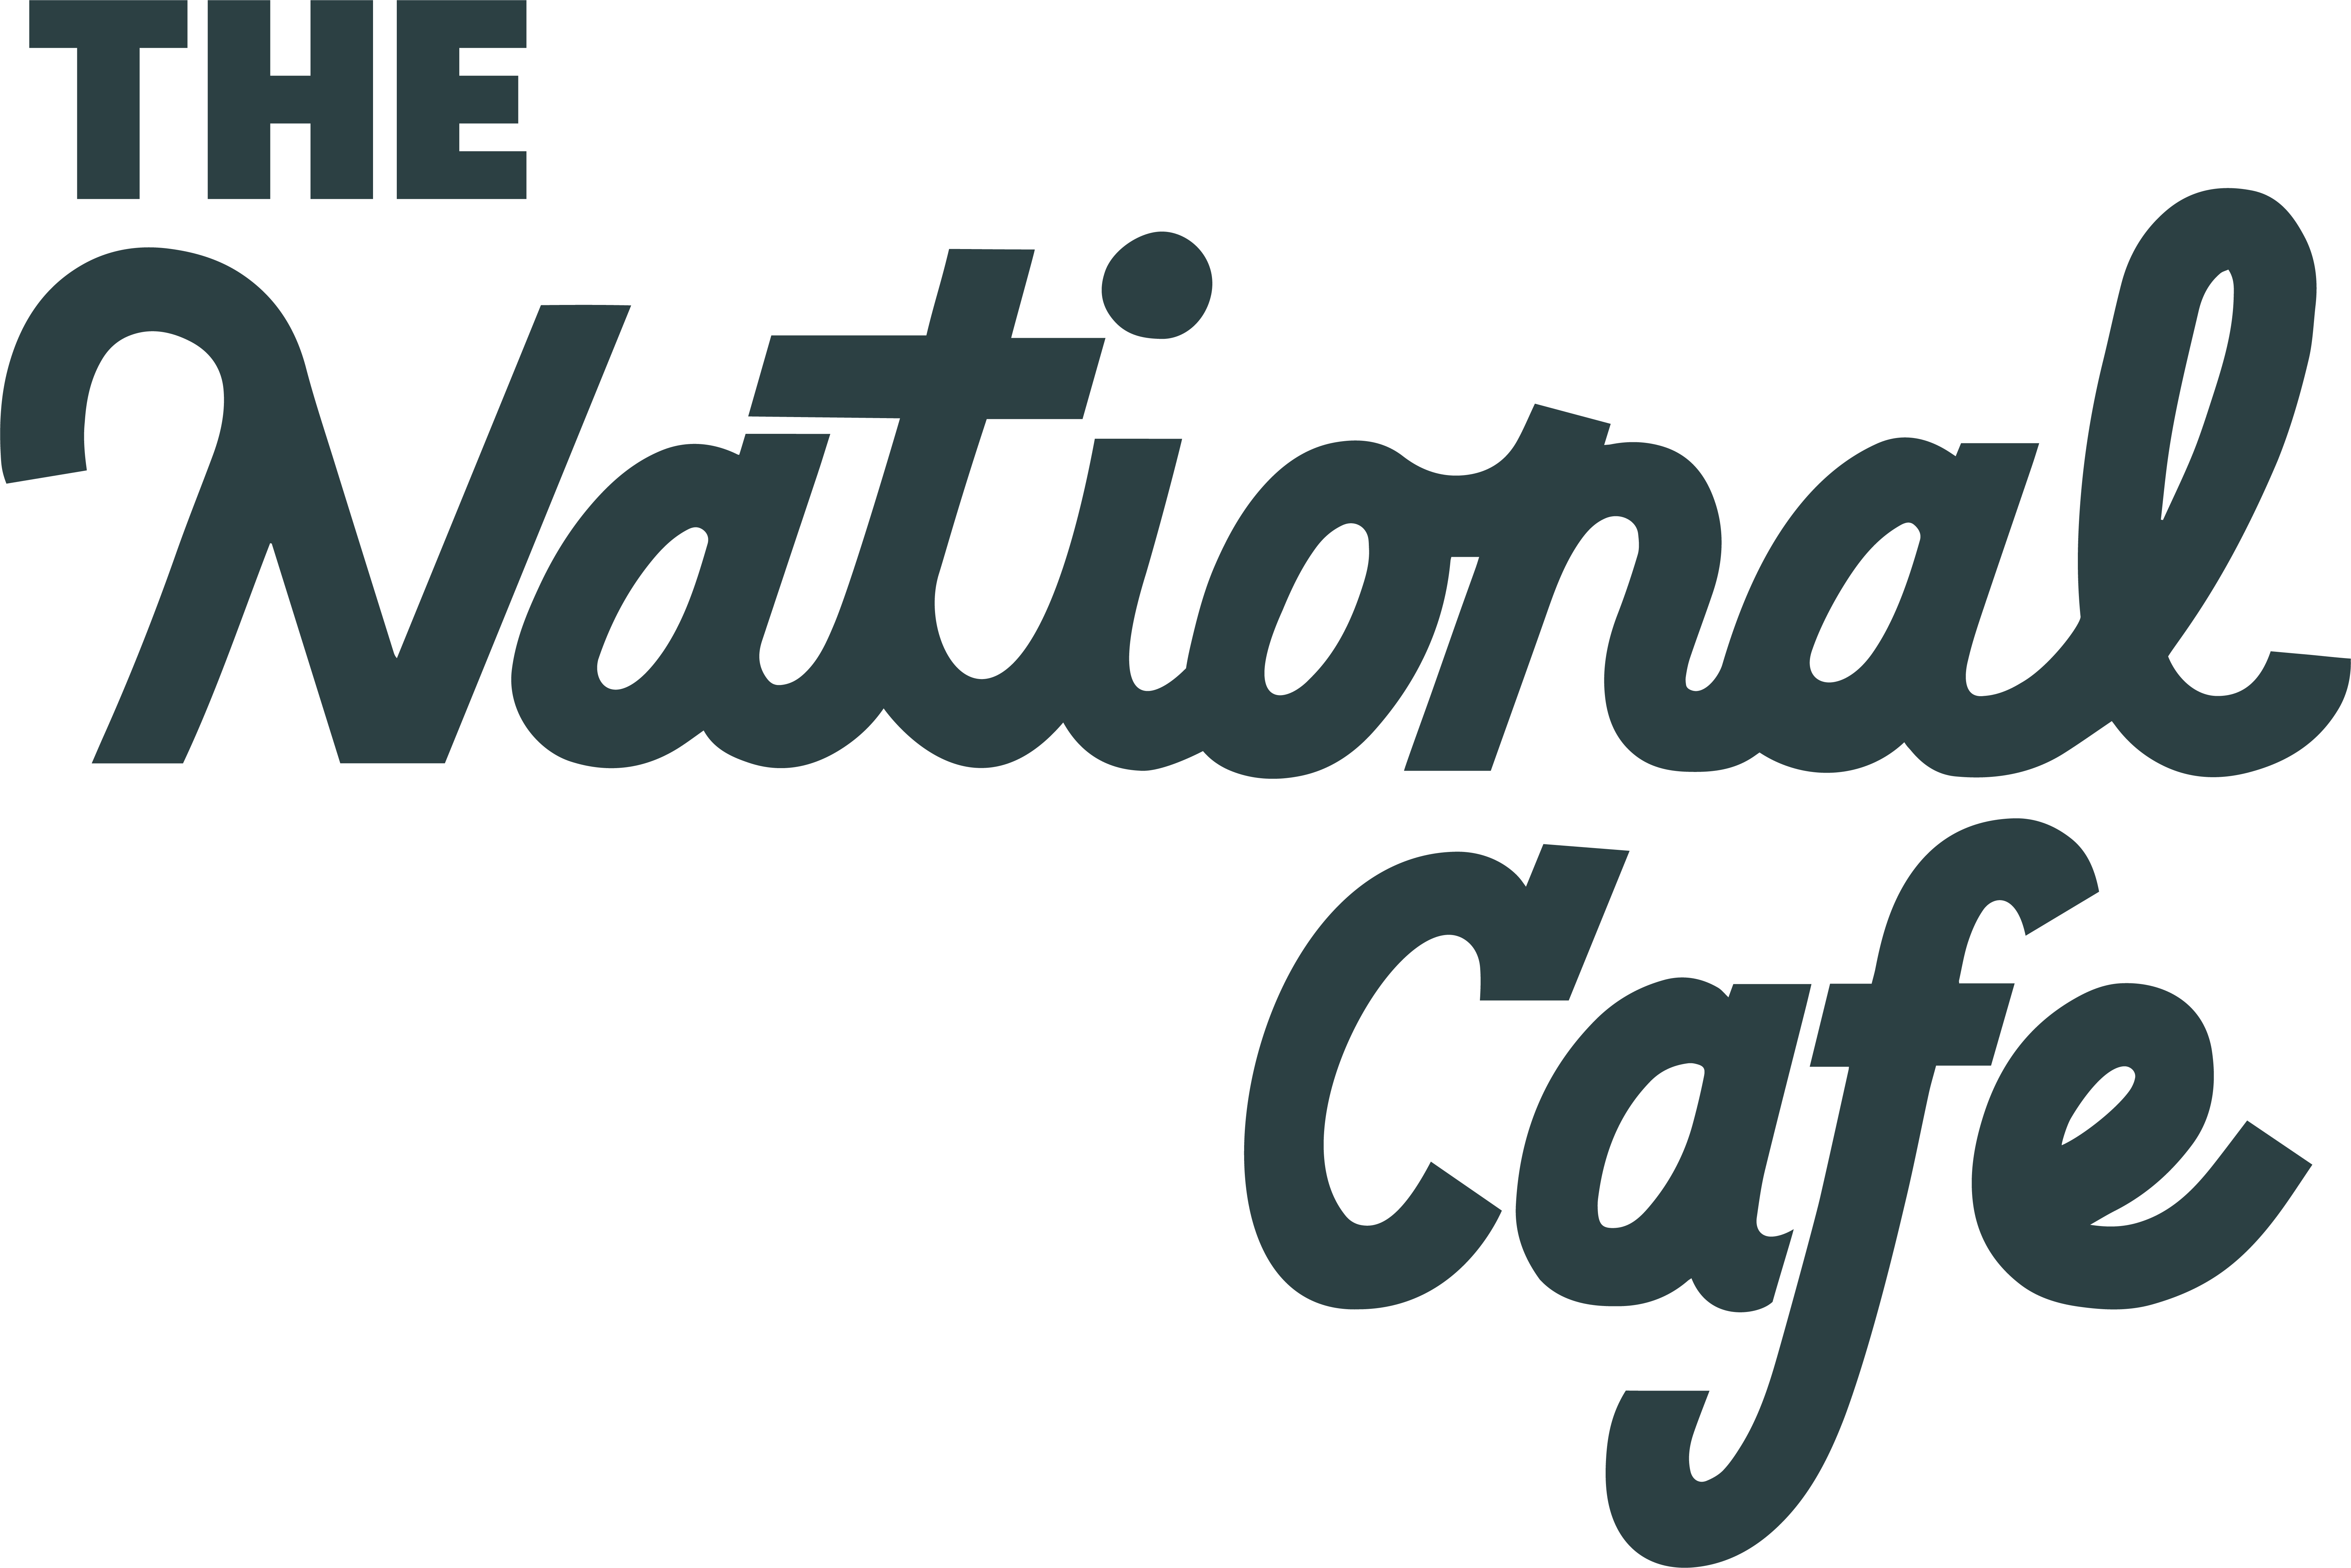 The National Cafe